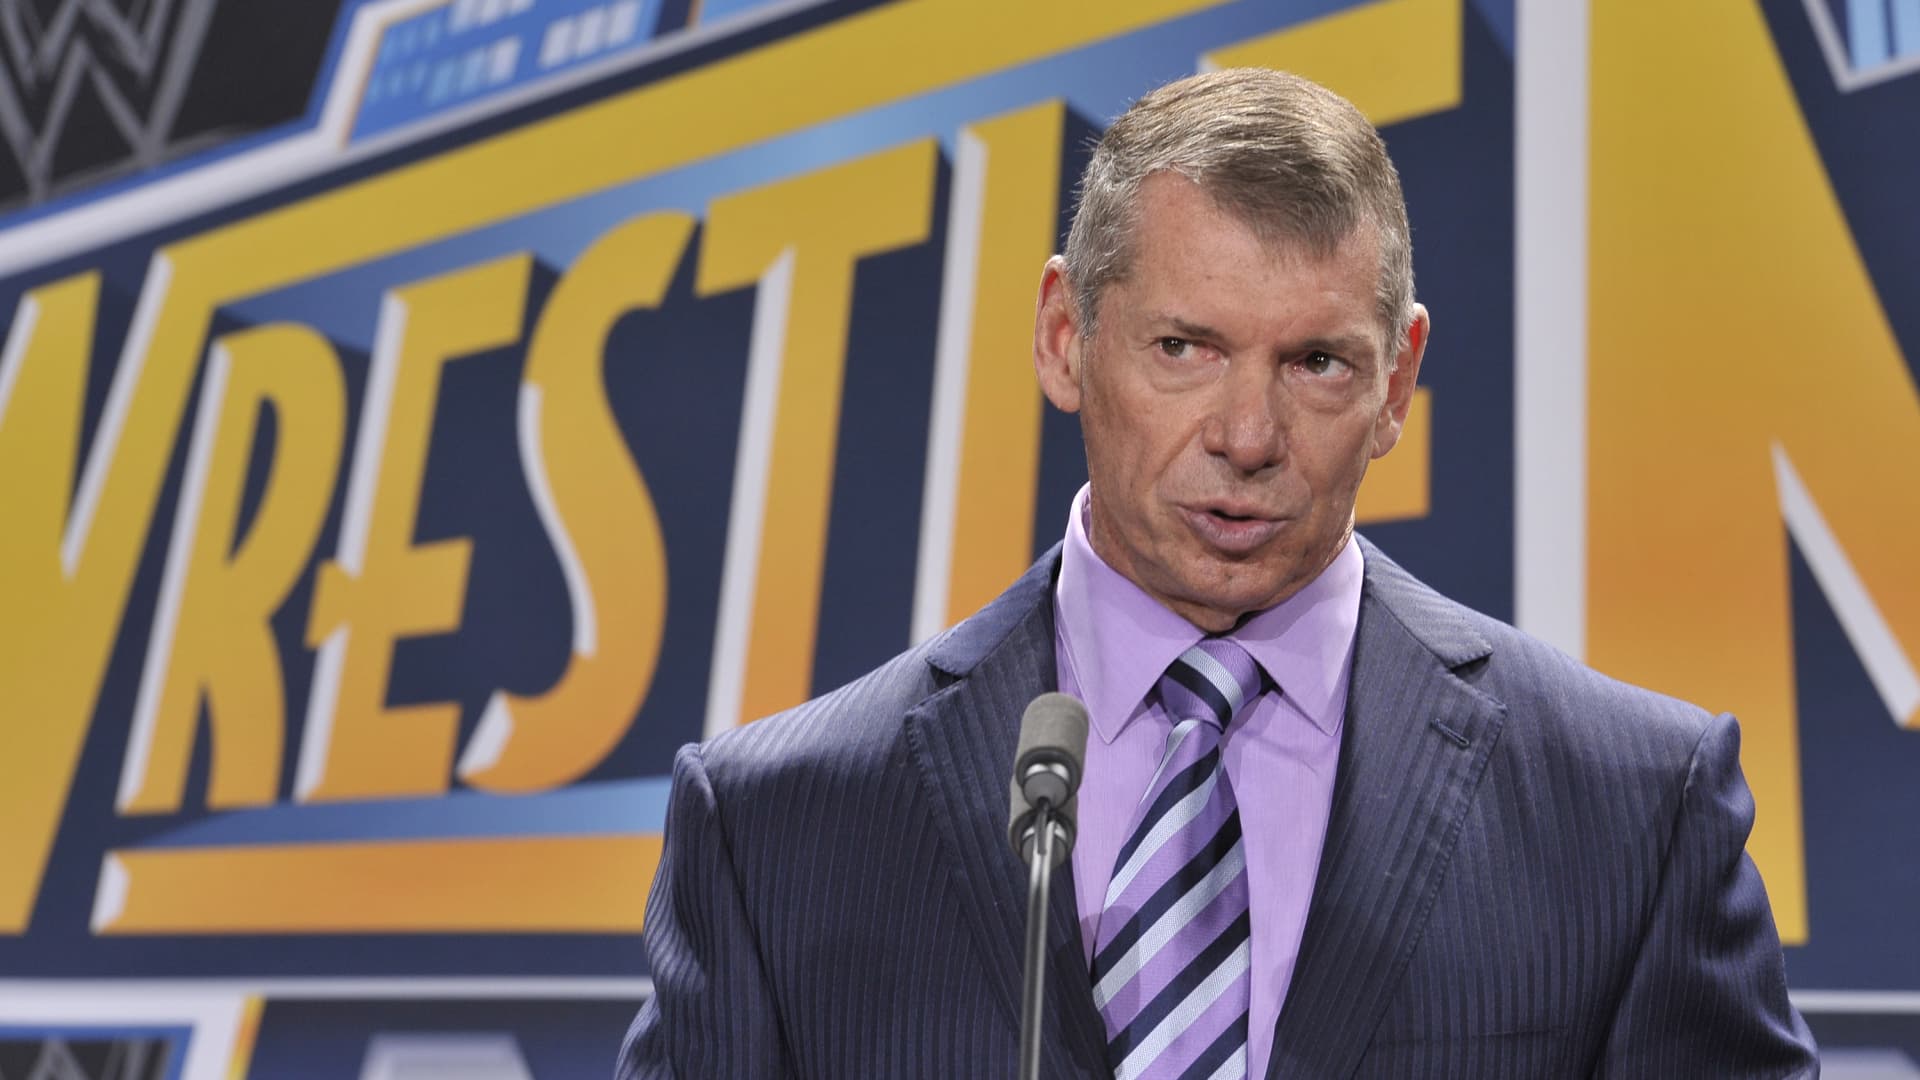 WWE’s Vince McMahon paid $12 million to settle misconduct allegations, report says